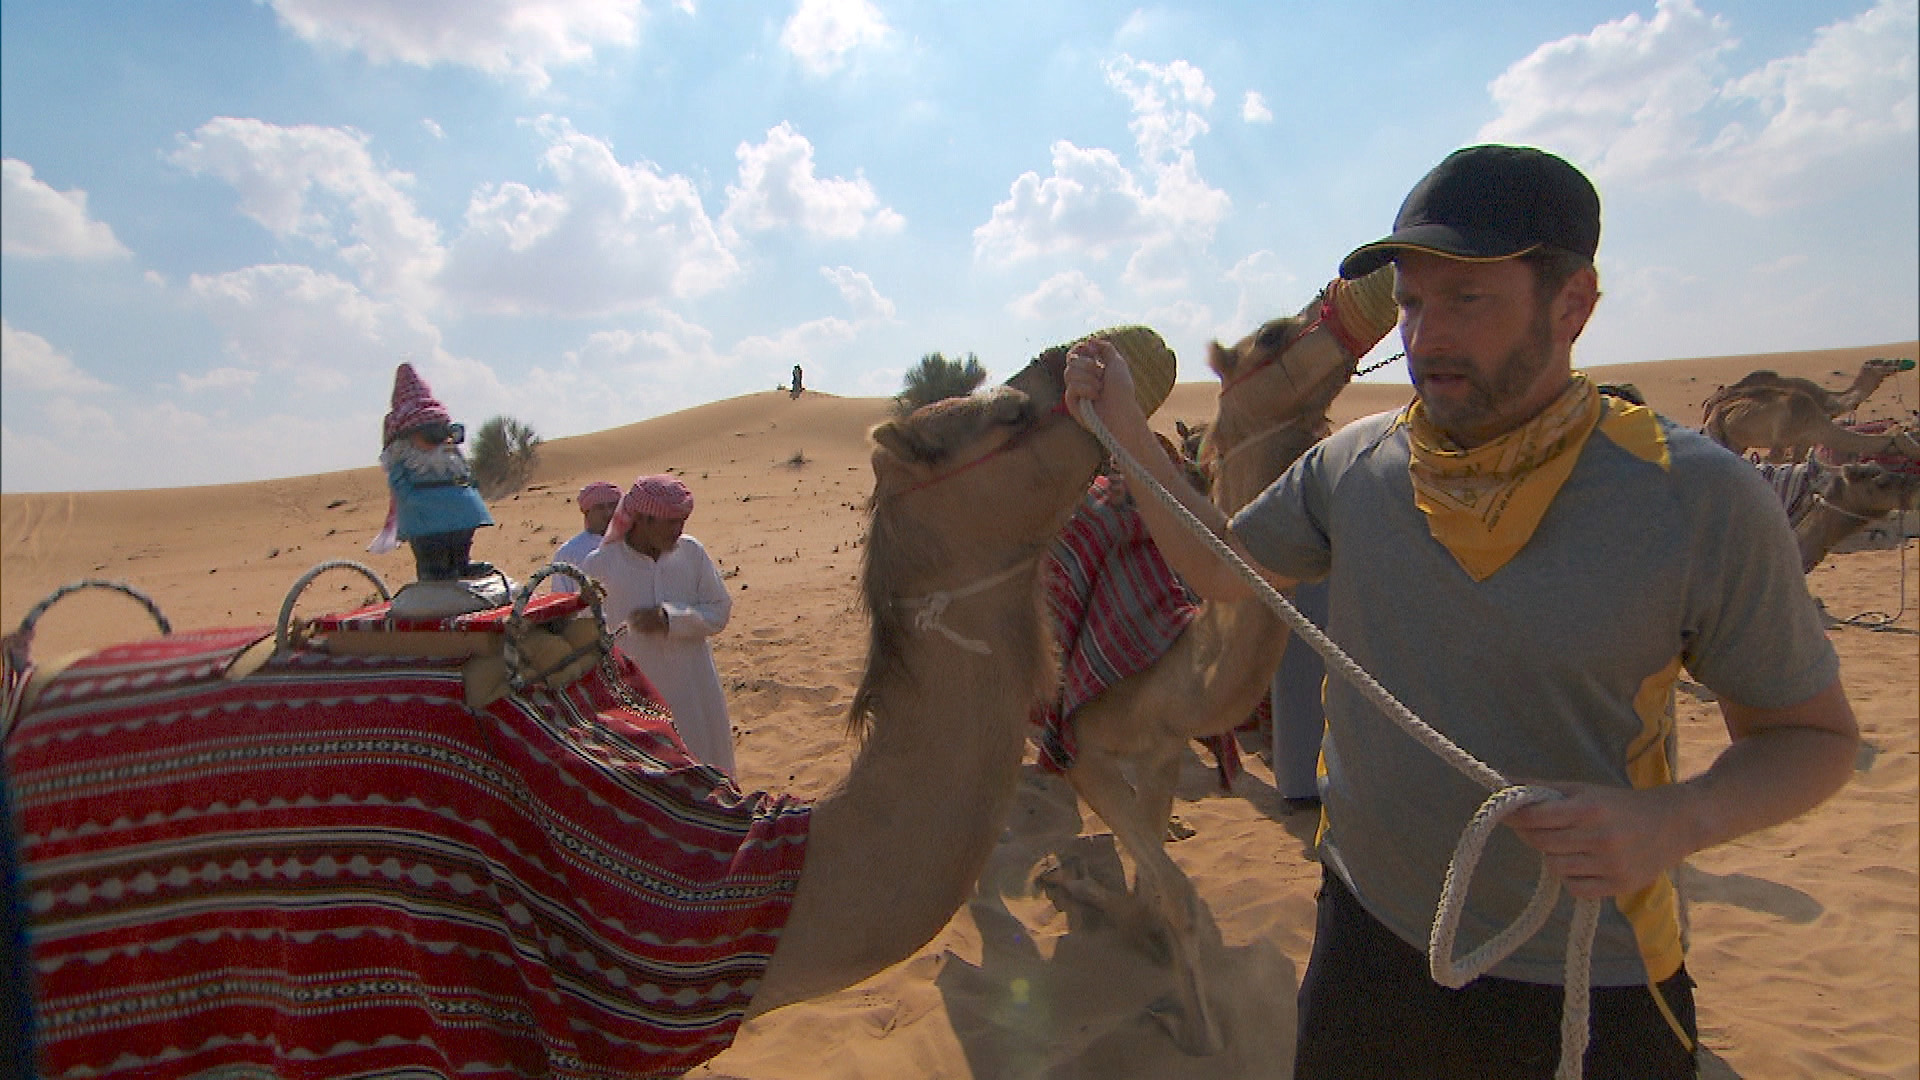 In Detour A, Burnie and Ashley must deliver four camels to a Bedouin camp.